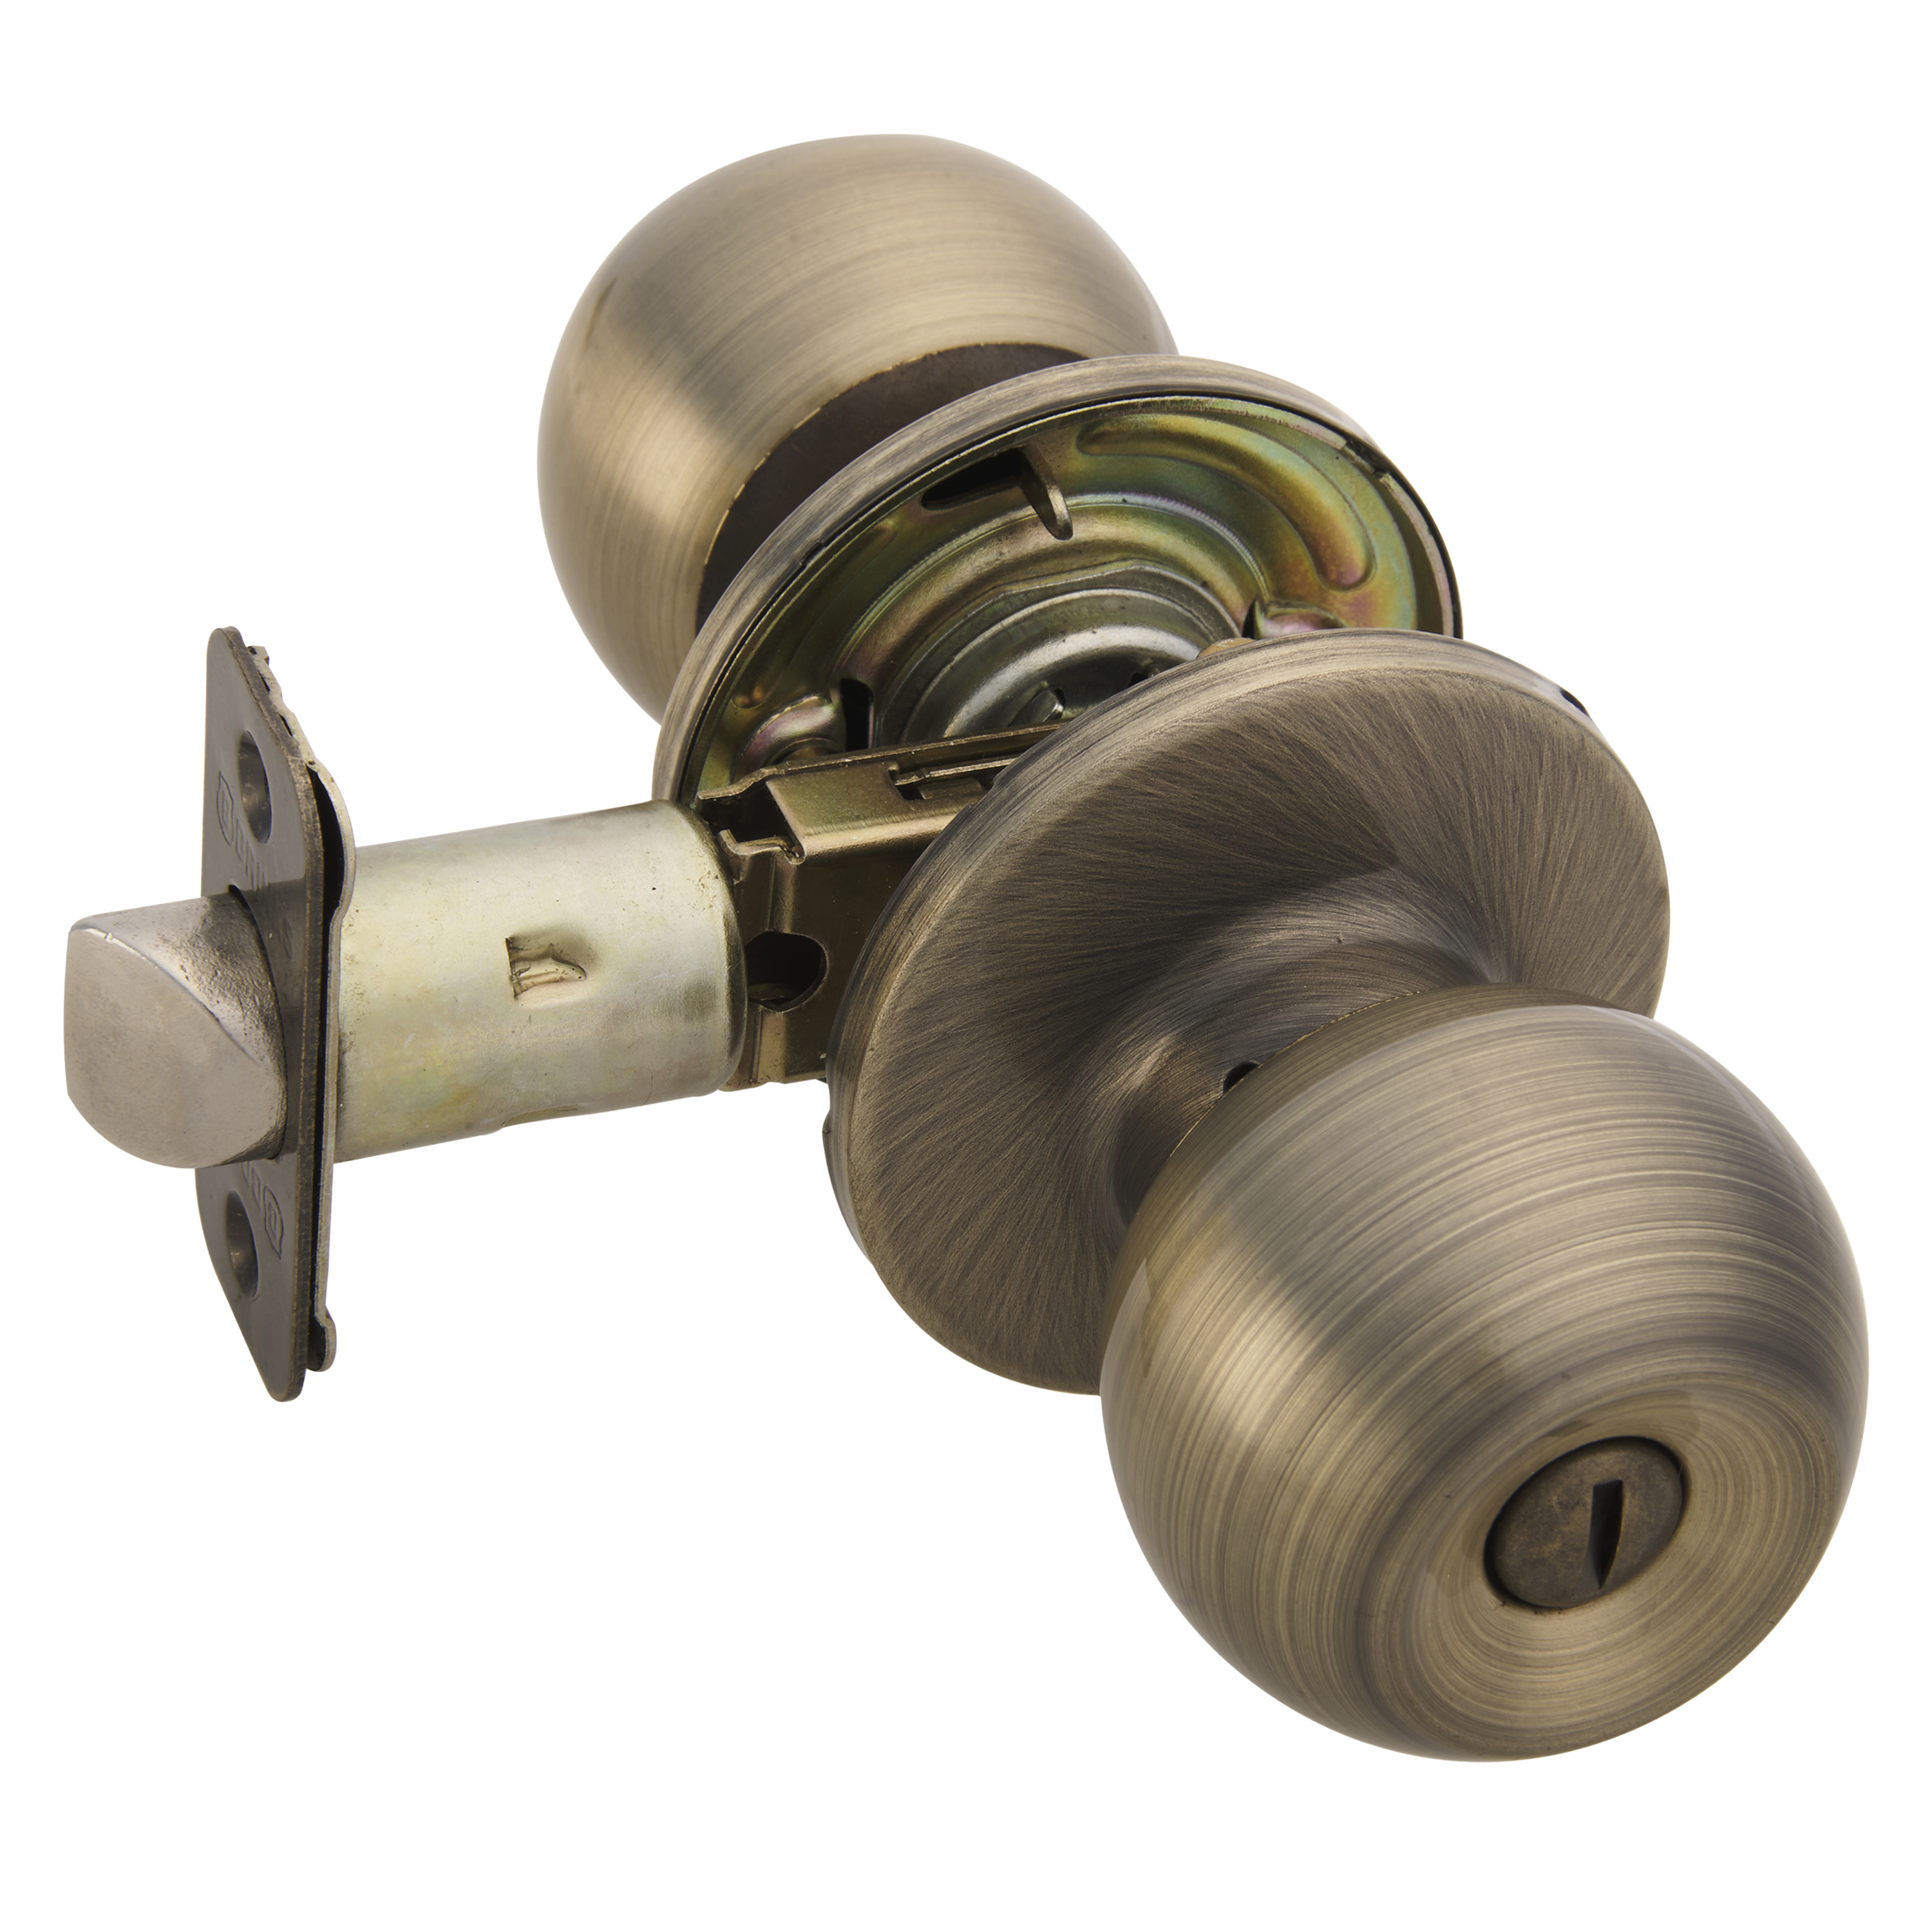 Brinks, Privacy Bed/Bath Ball Doorknob, Antique Brass Finish - image 5 of 8